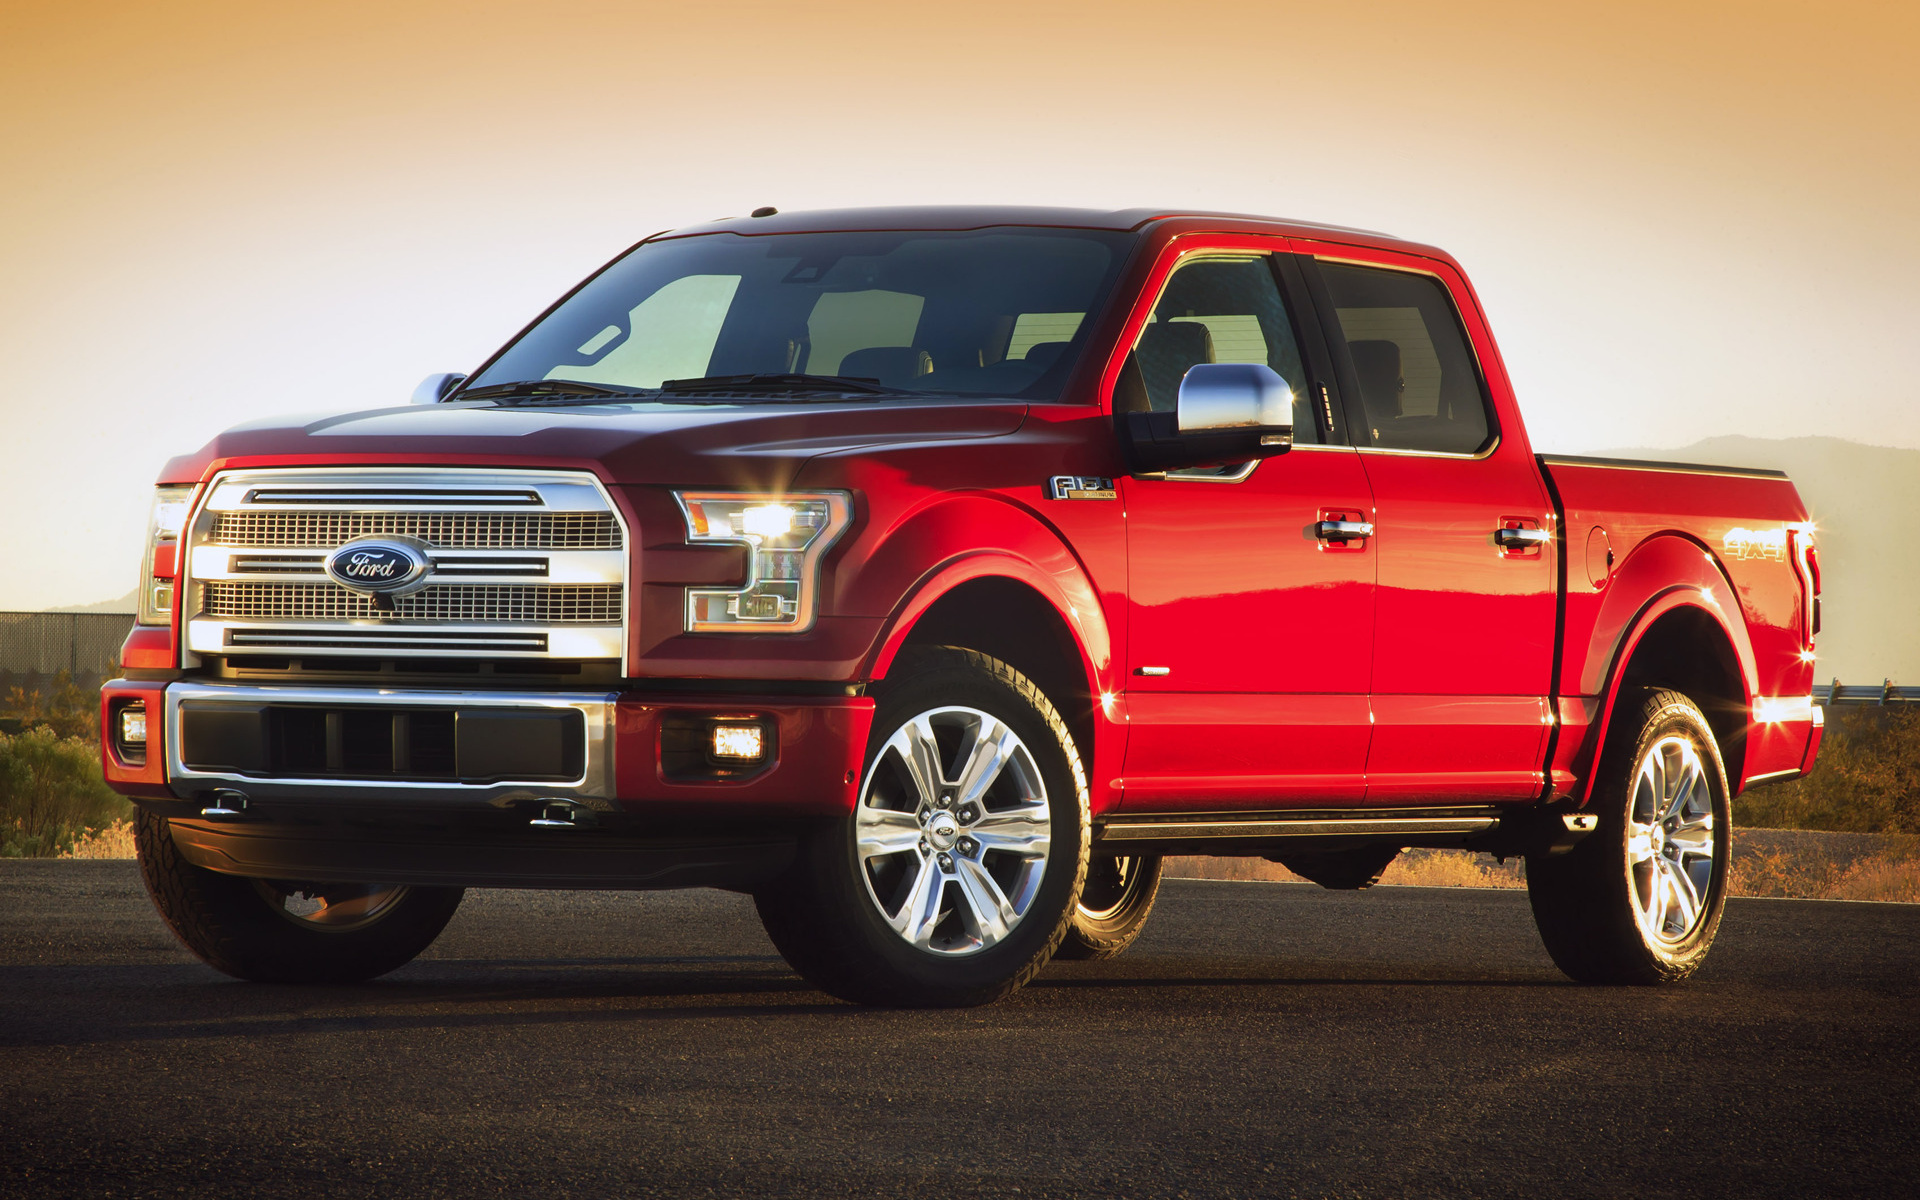 2015 Ford F-150 Platinum SuperCrew - Wallpapers and HD Images | Car Pixel 2010 Ford F 150 5.4 Towing Capacity